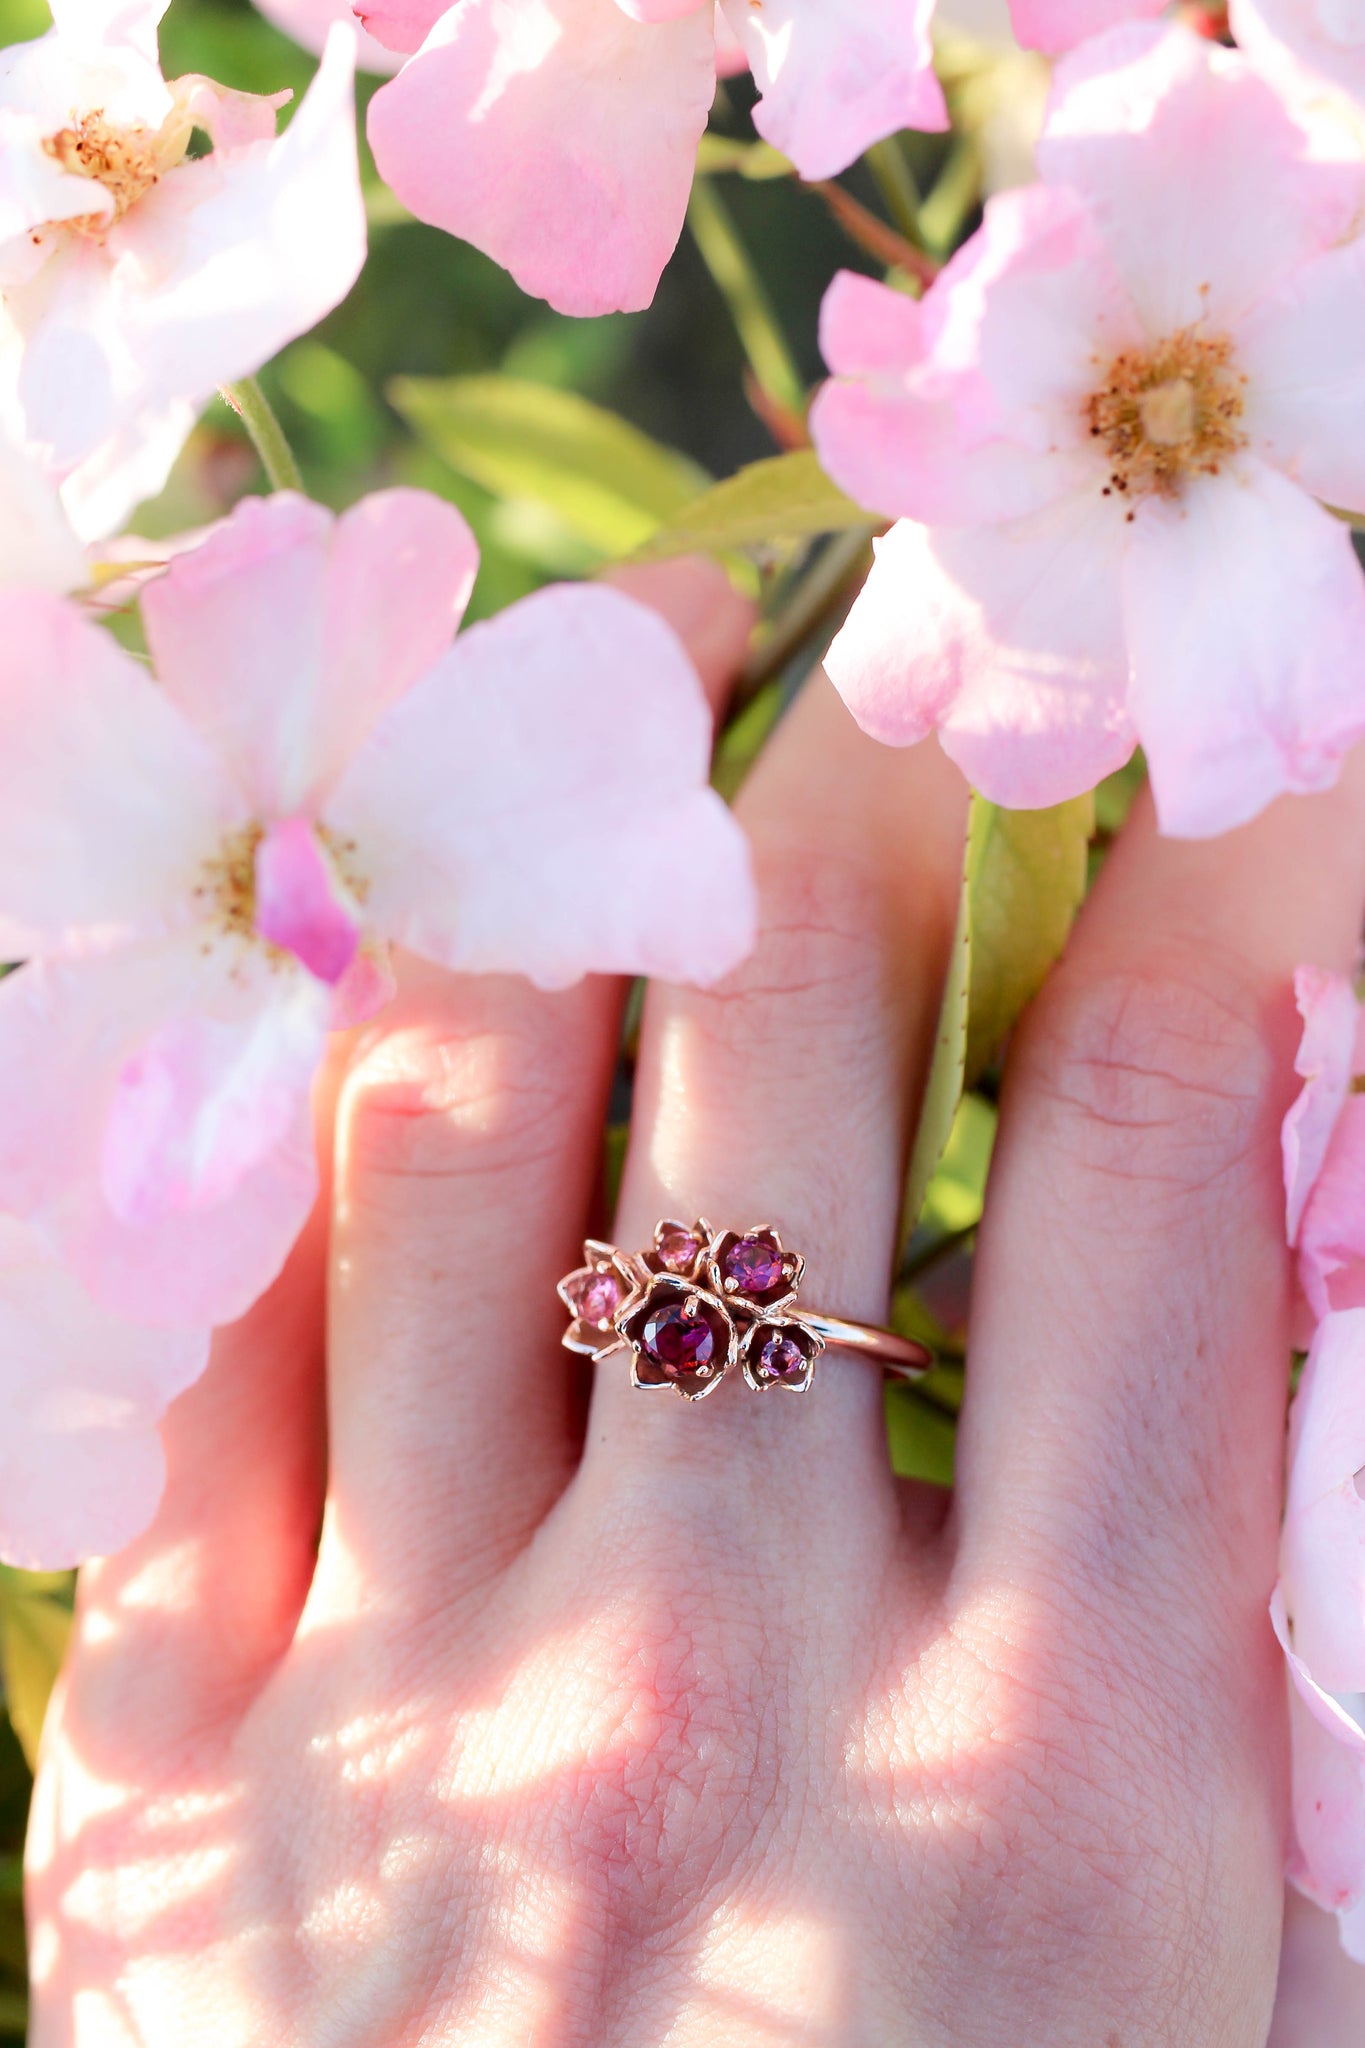 Lily of the valley ring with pink tourmalines - Eden Garden Jewelry™